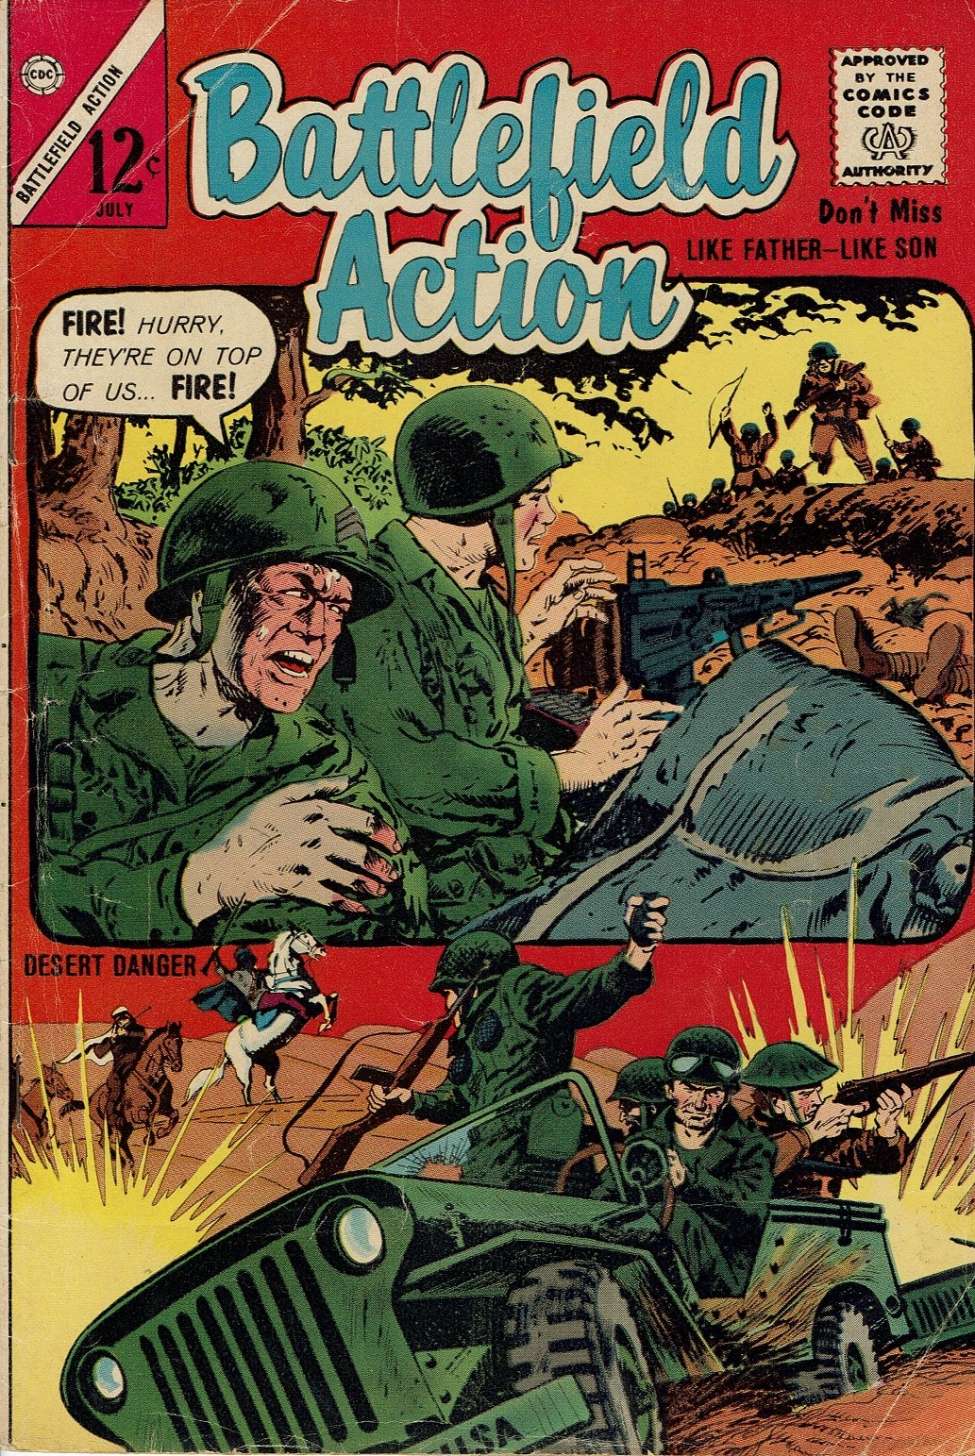 Comic Book Cover For Battlefield Action 48